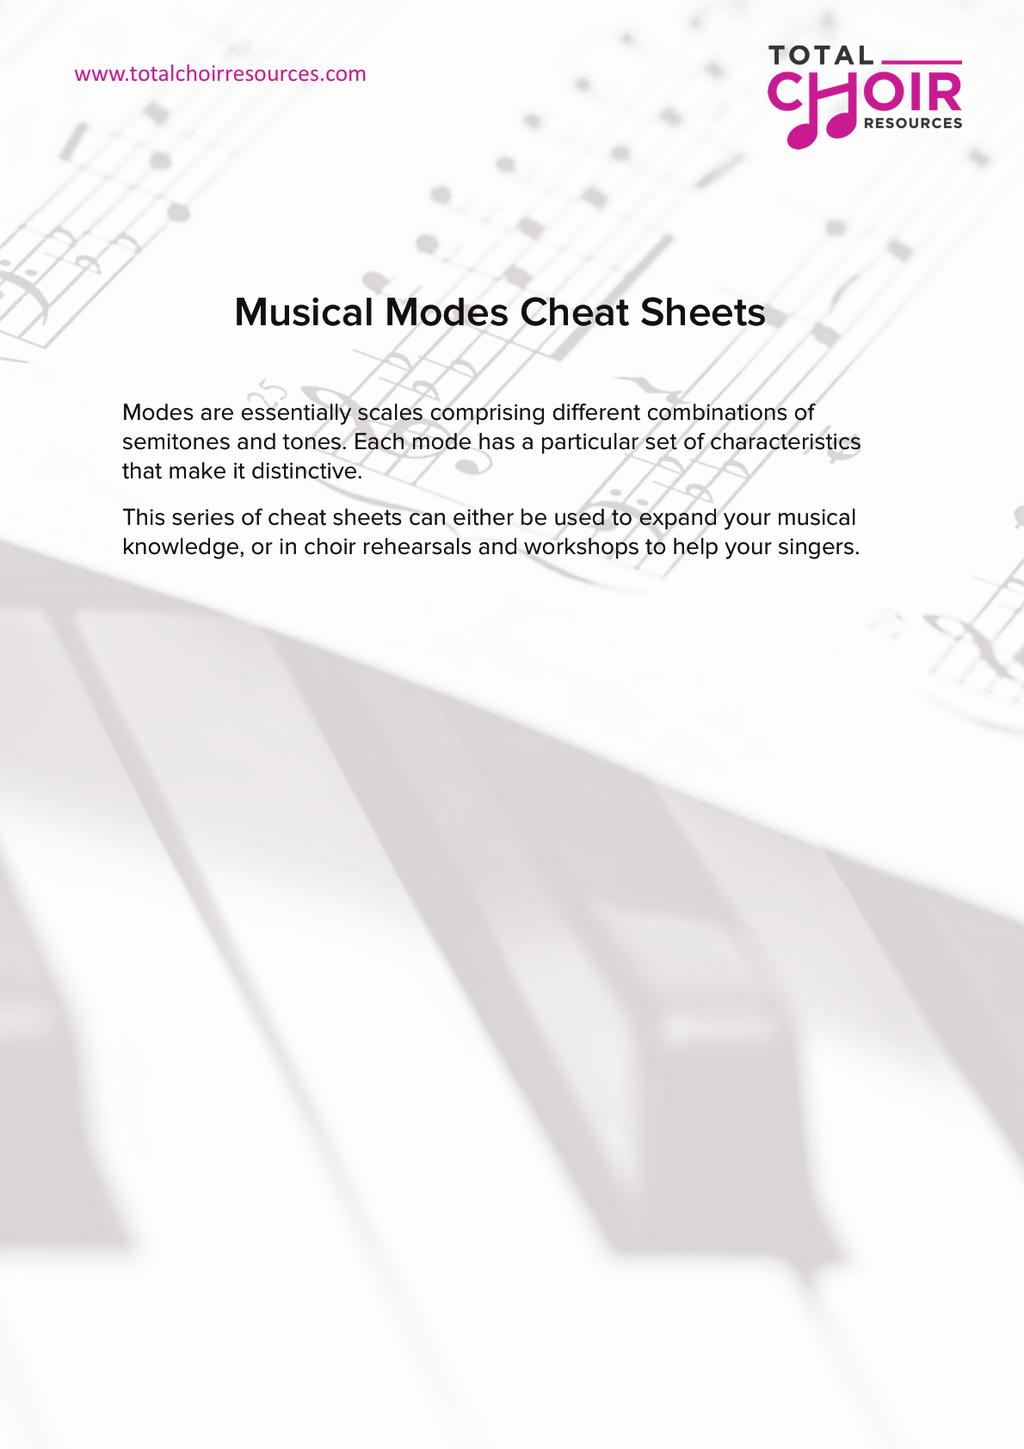 Musical Modes Cheat Sheets Modes are essentially scales comprising different combinations of semitones and tones.